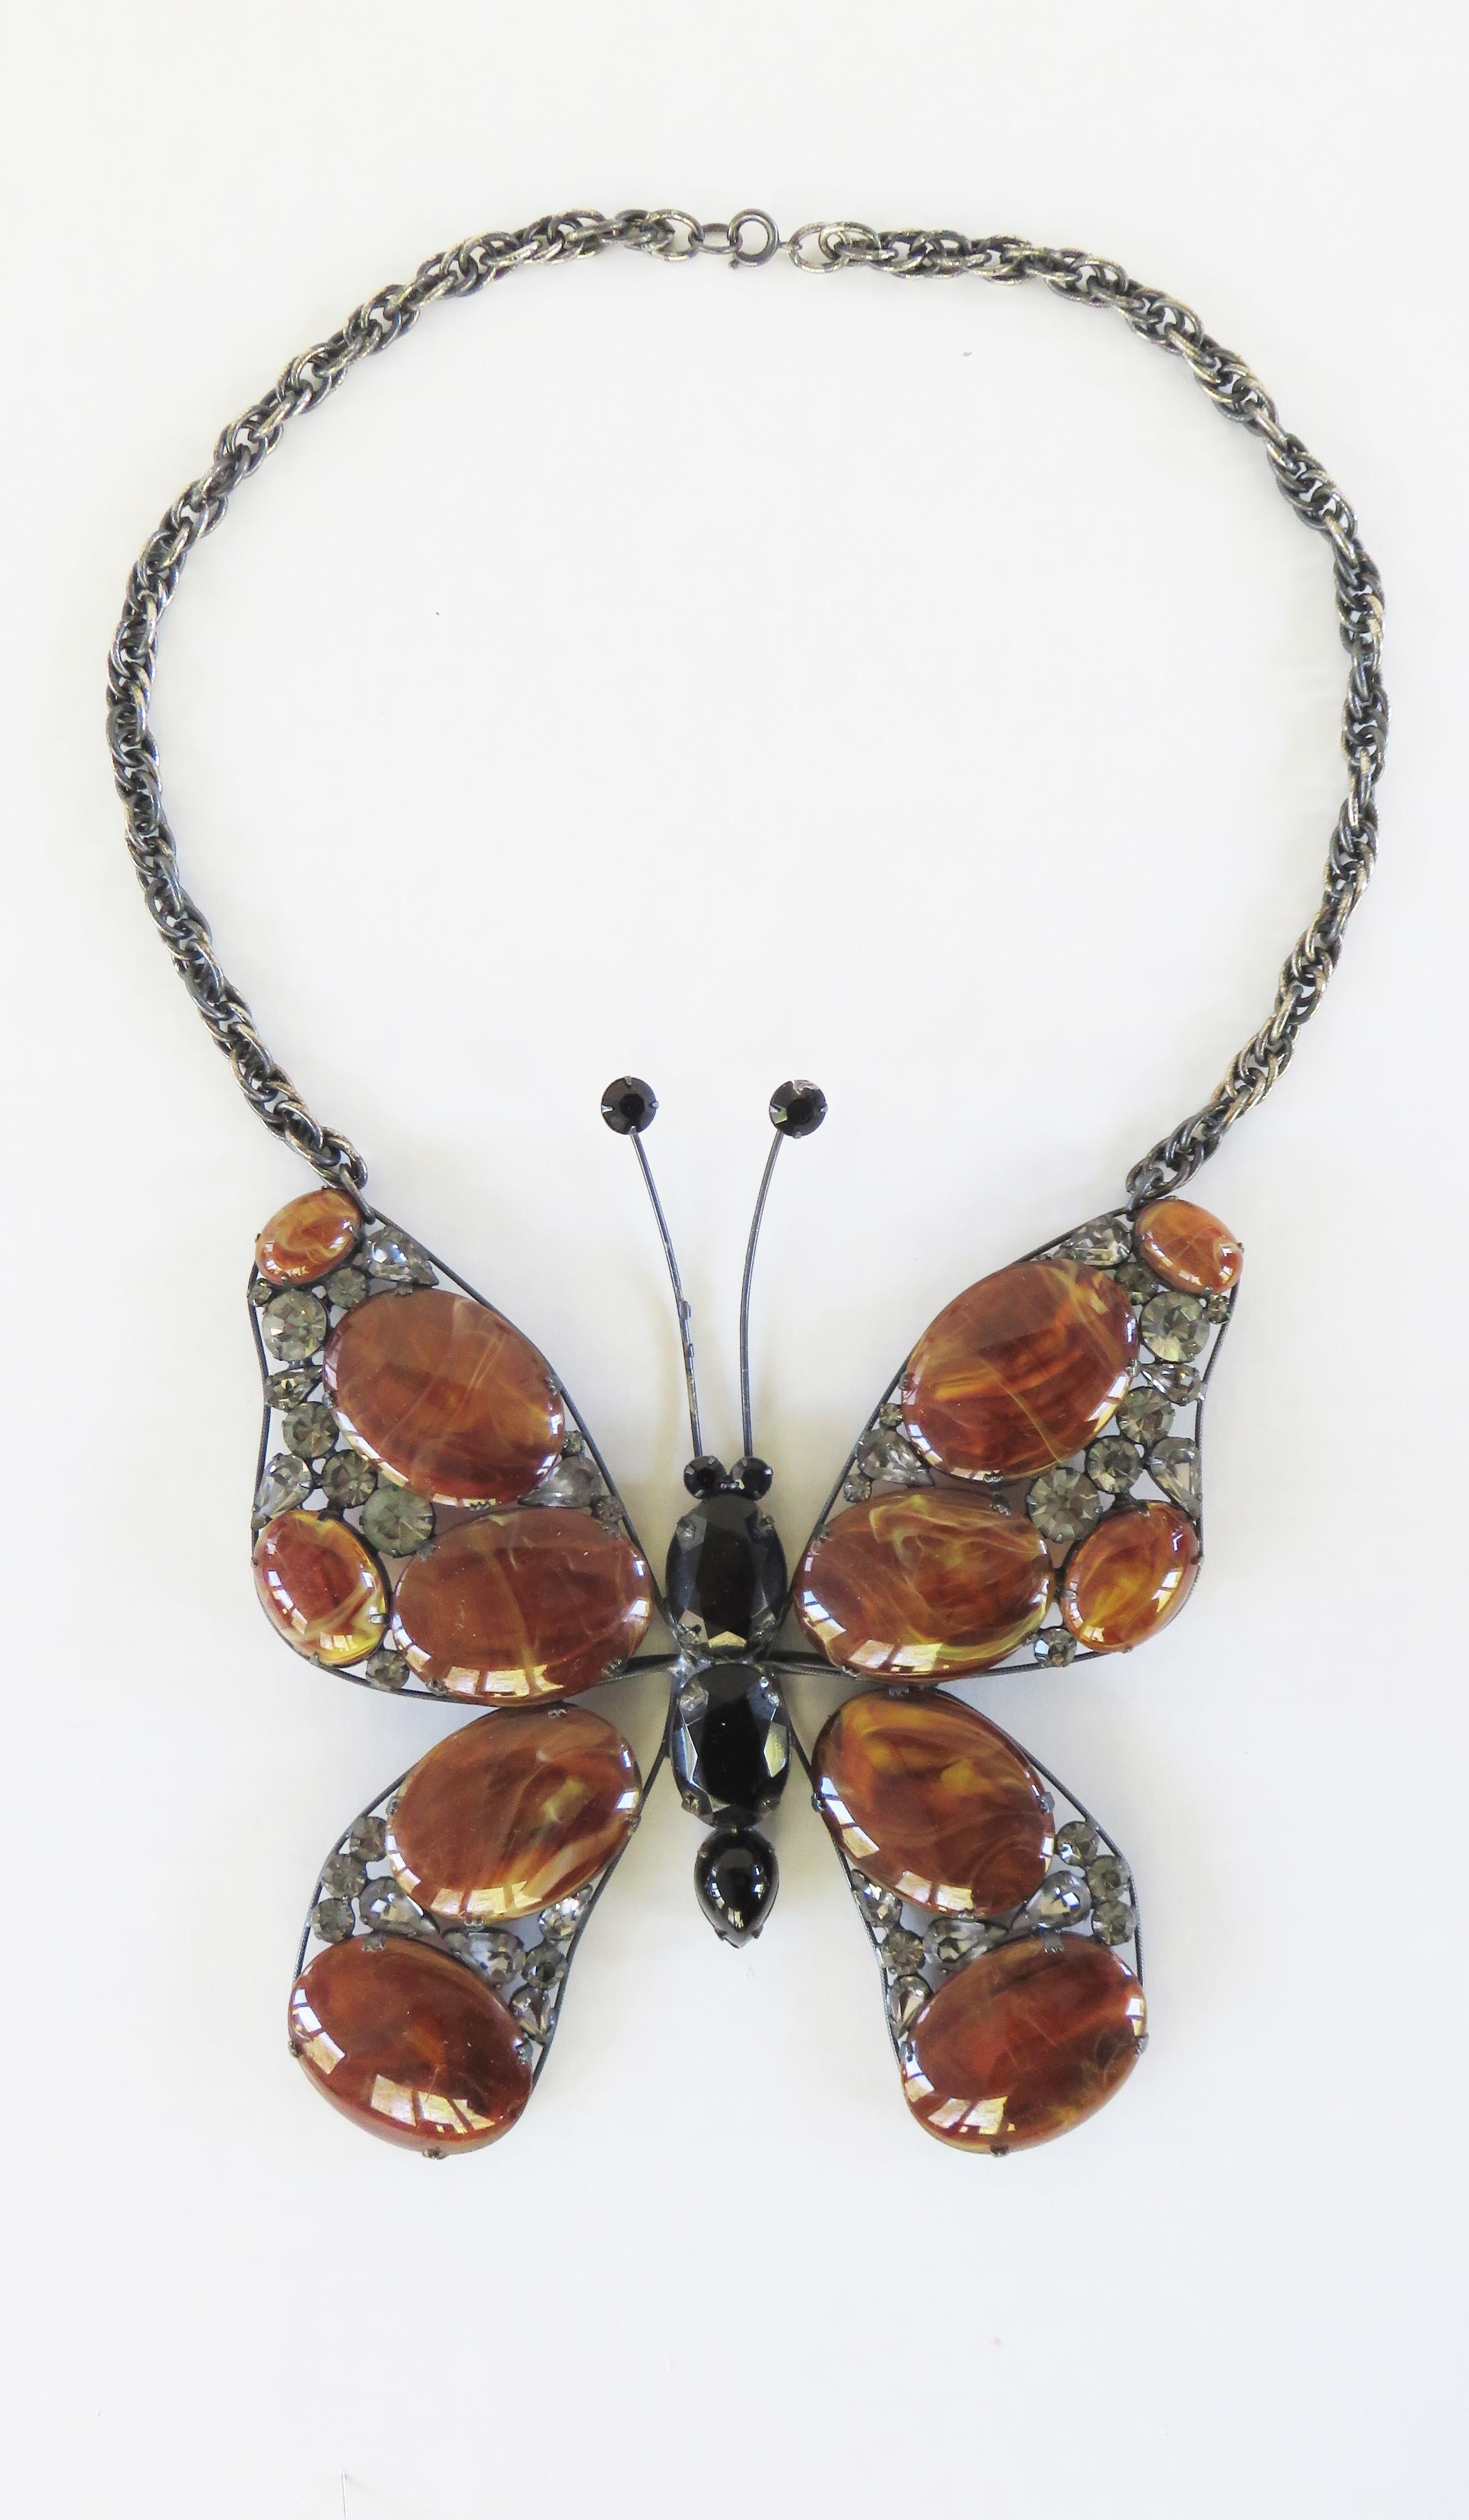 A fabulous large faux turtle shell and glass butterfly pendant necklace. It has a wing shaped metal frame onto which discs of different sizes of faux turtle shell and glass rhinestones are attached. The center body is comprised of 3 black glass